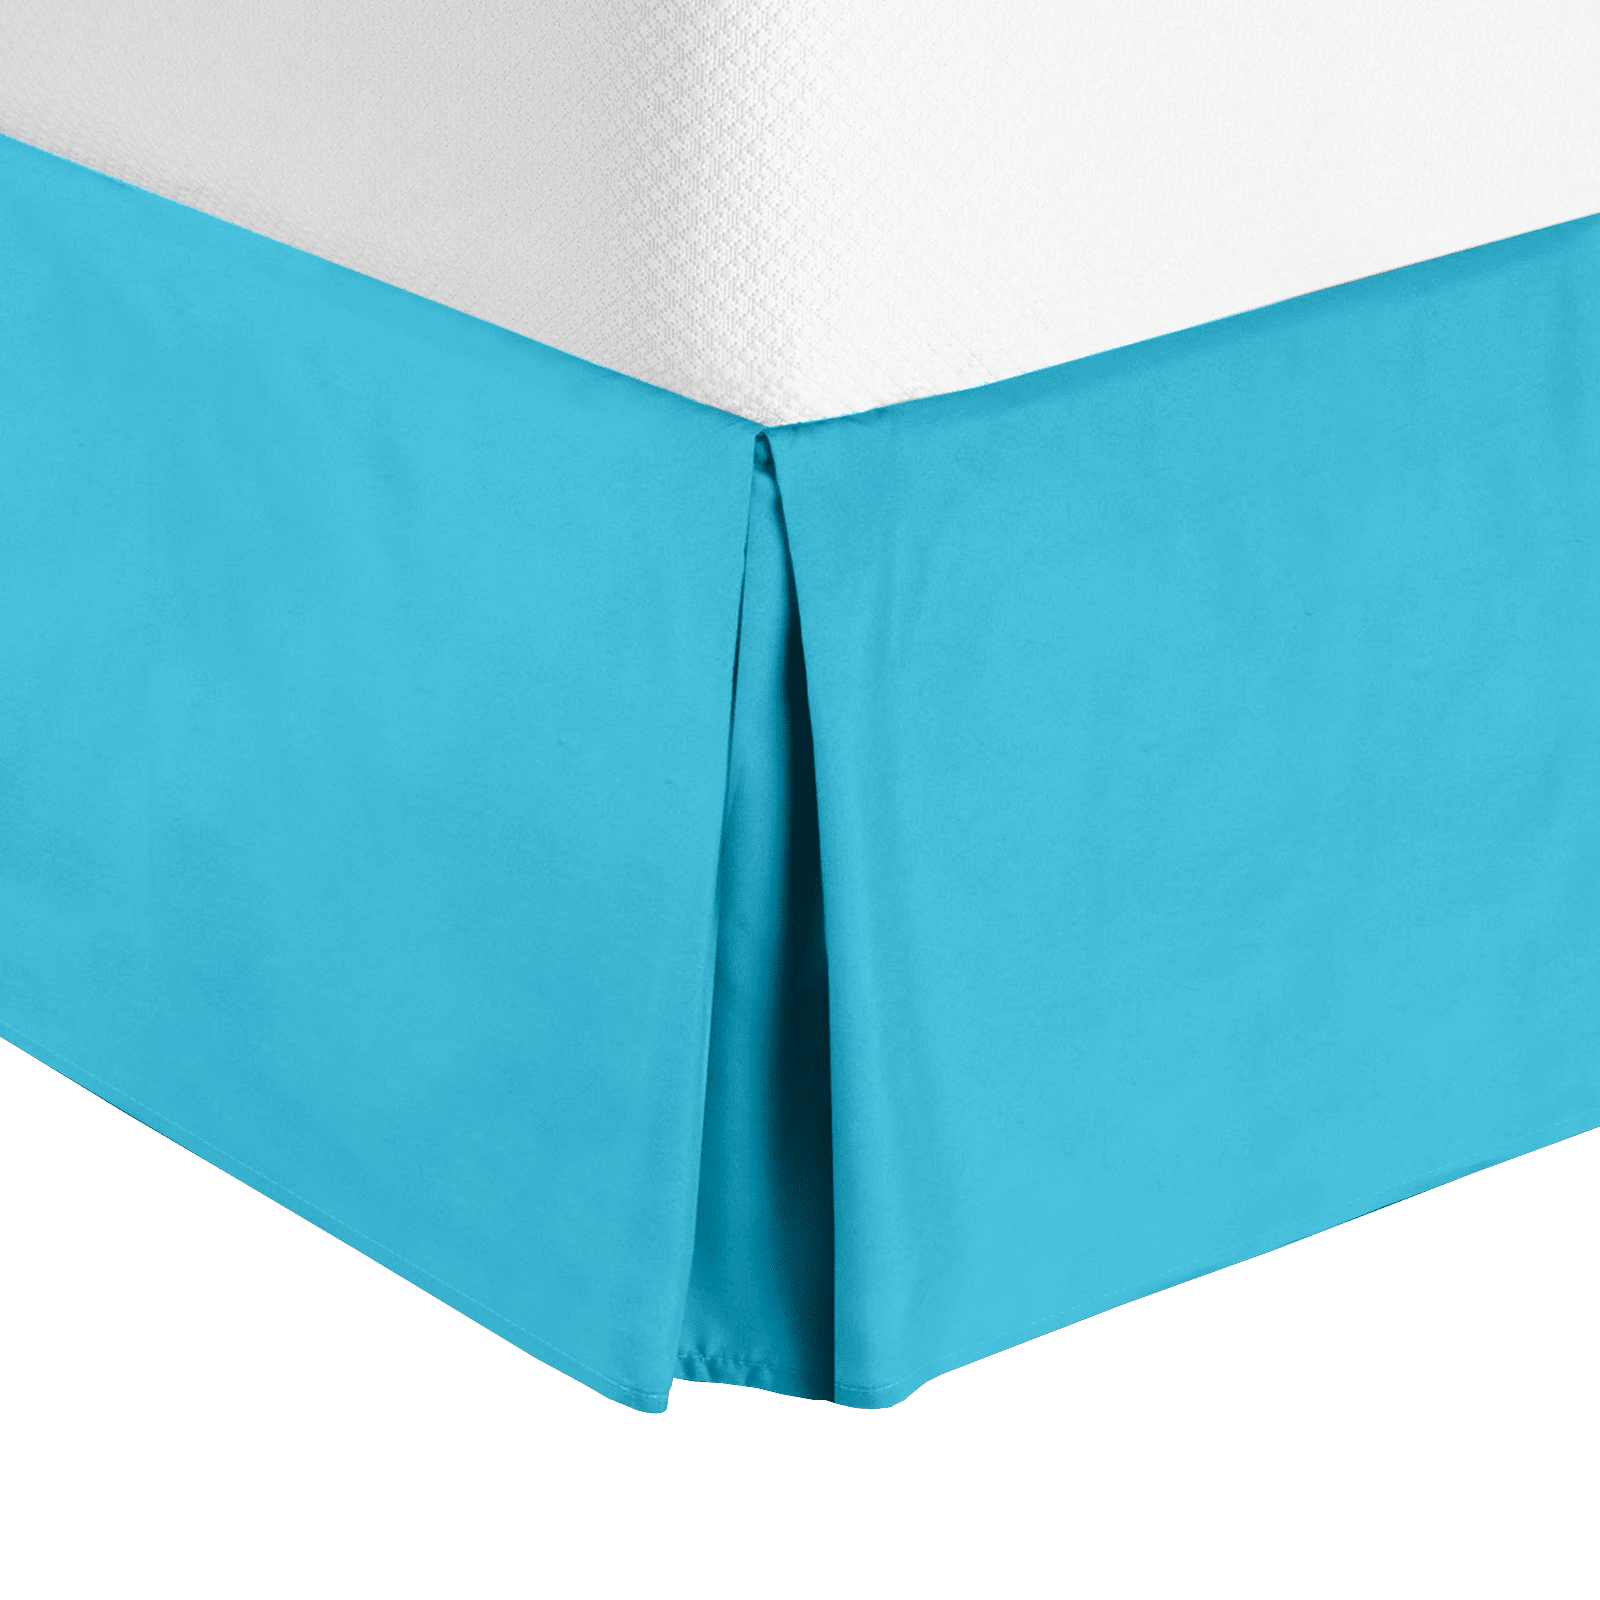 Full Hotel Luxury Pleated Tailored Bed Skirt 14” Drop Dust Ruffle Iced Blue 